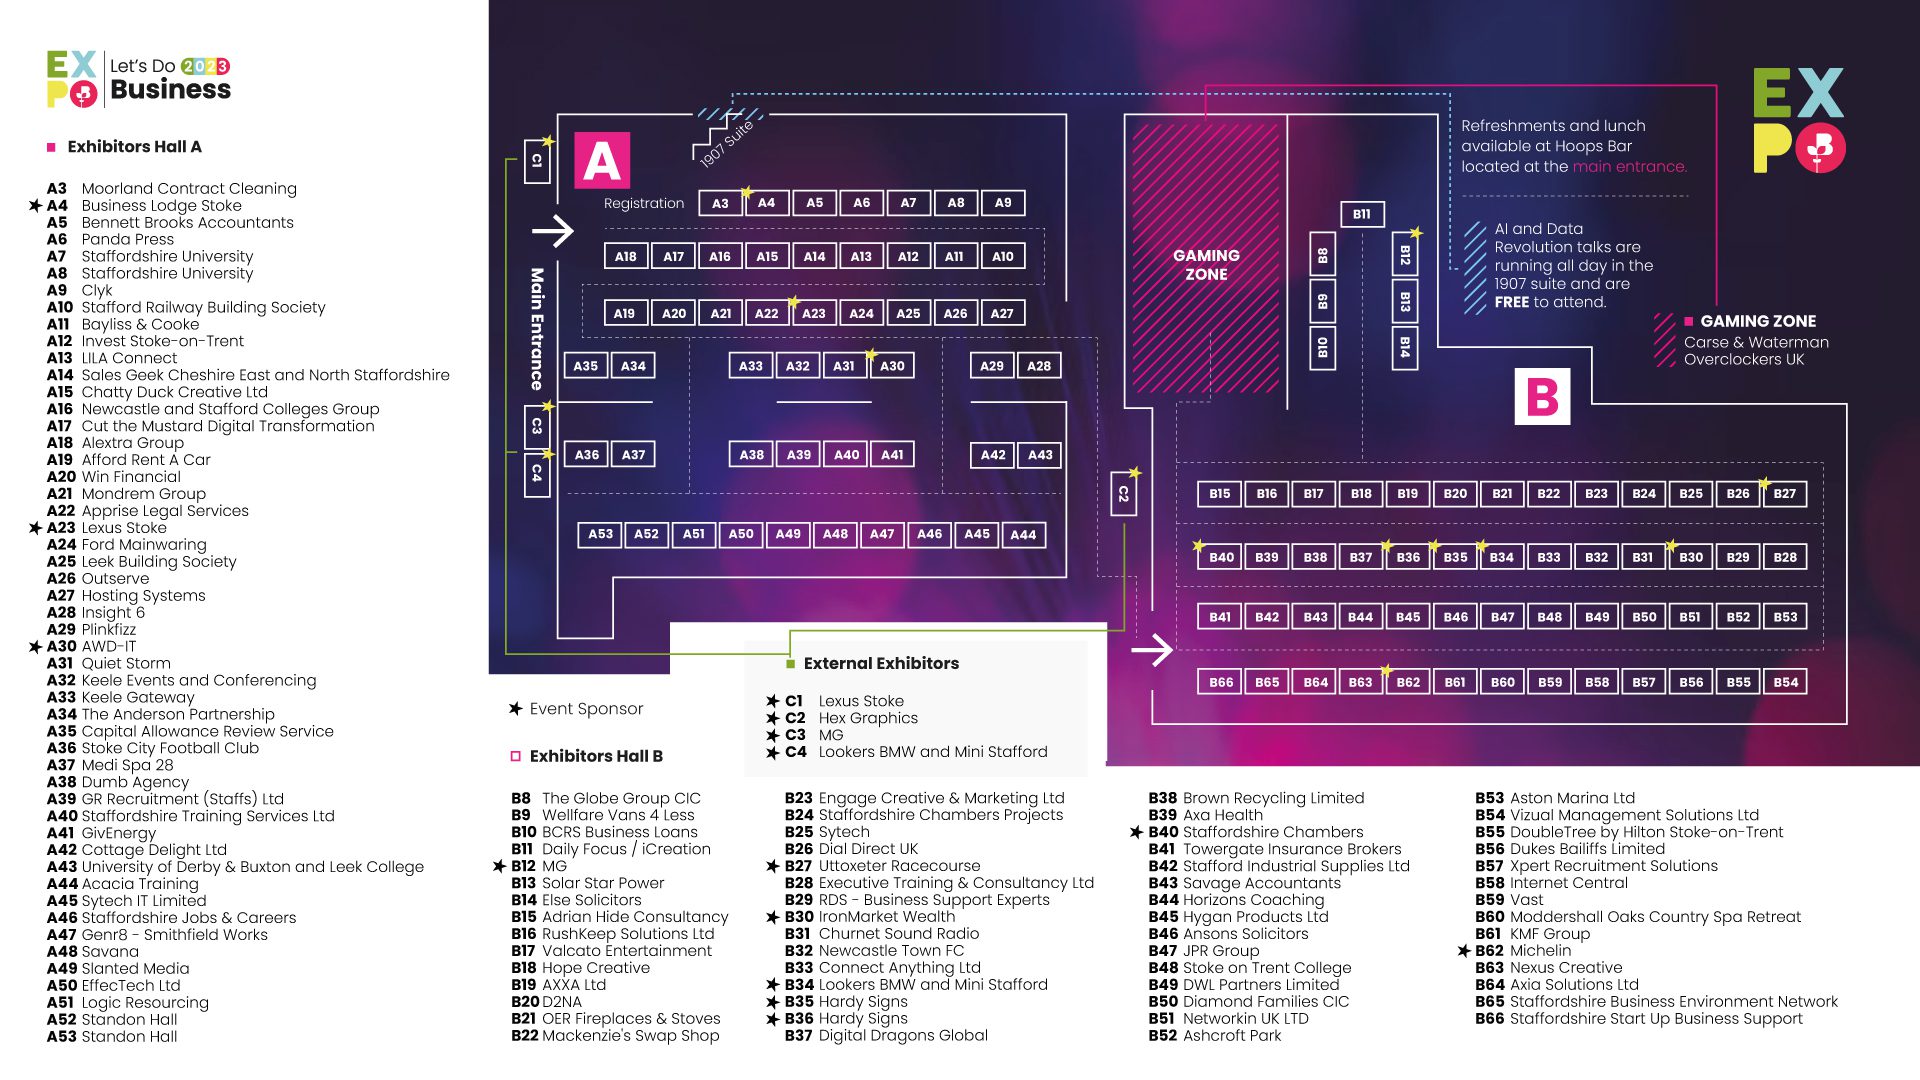 Let's Do Business Exhibitor map